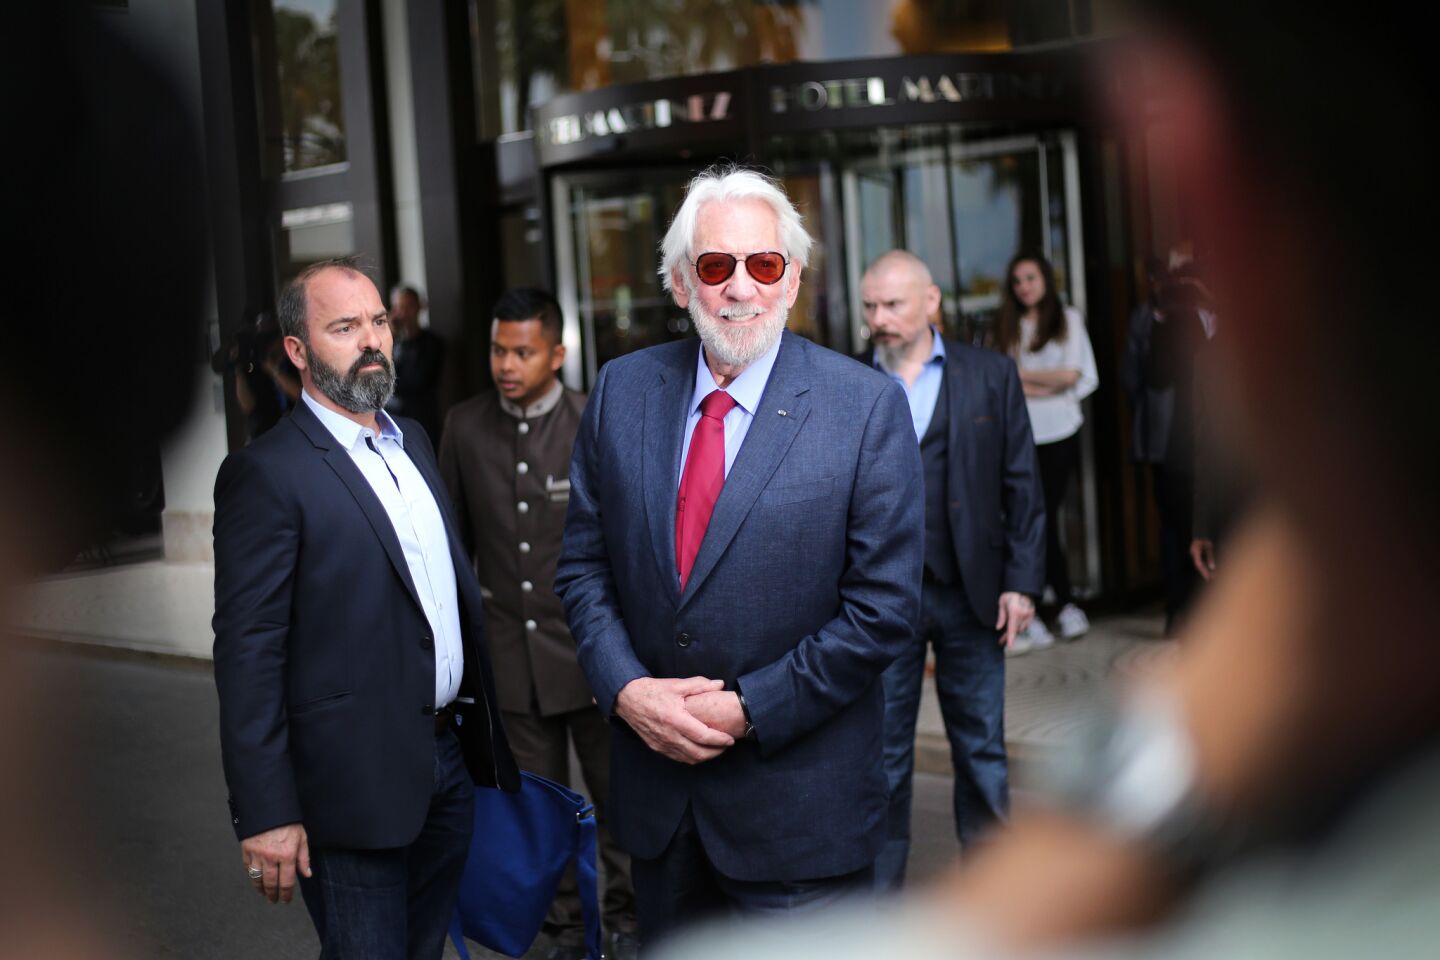 Jury member Donald Sutherland arrives at the Cannes Film Fetival.